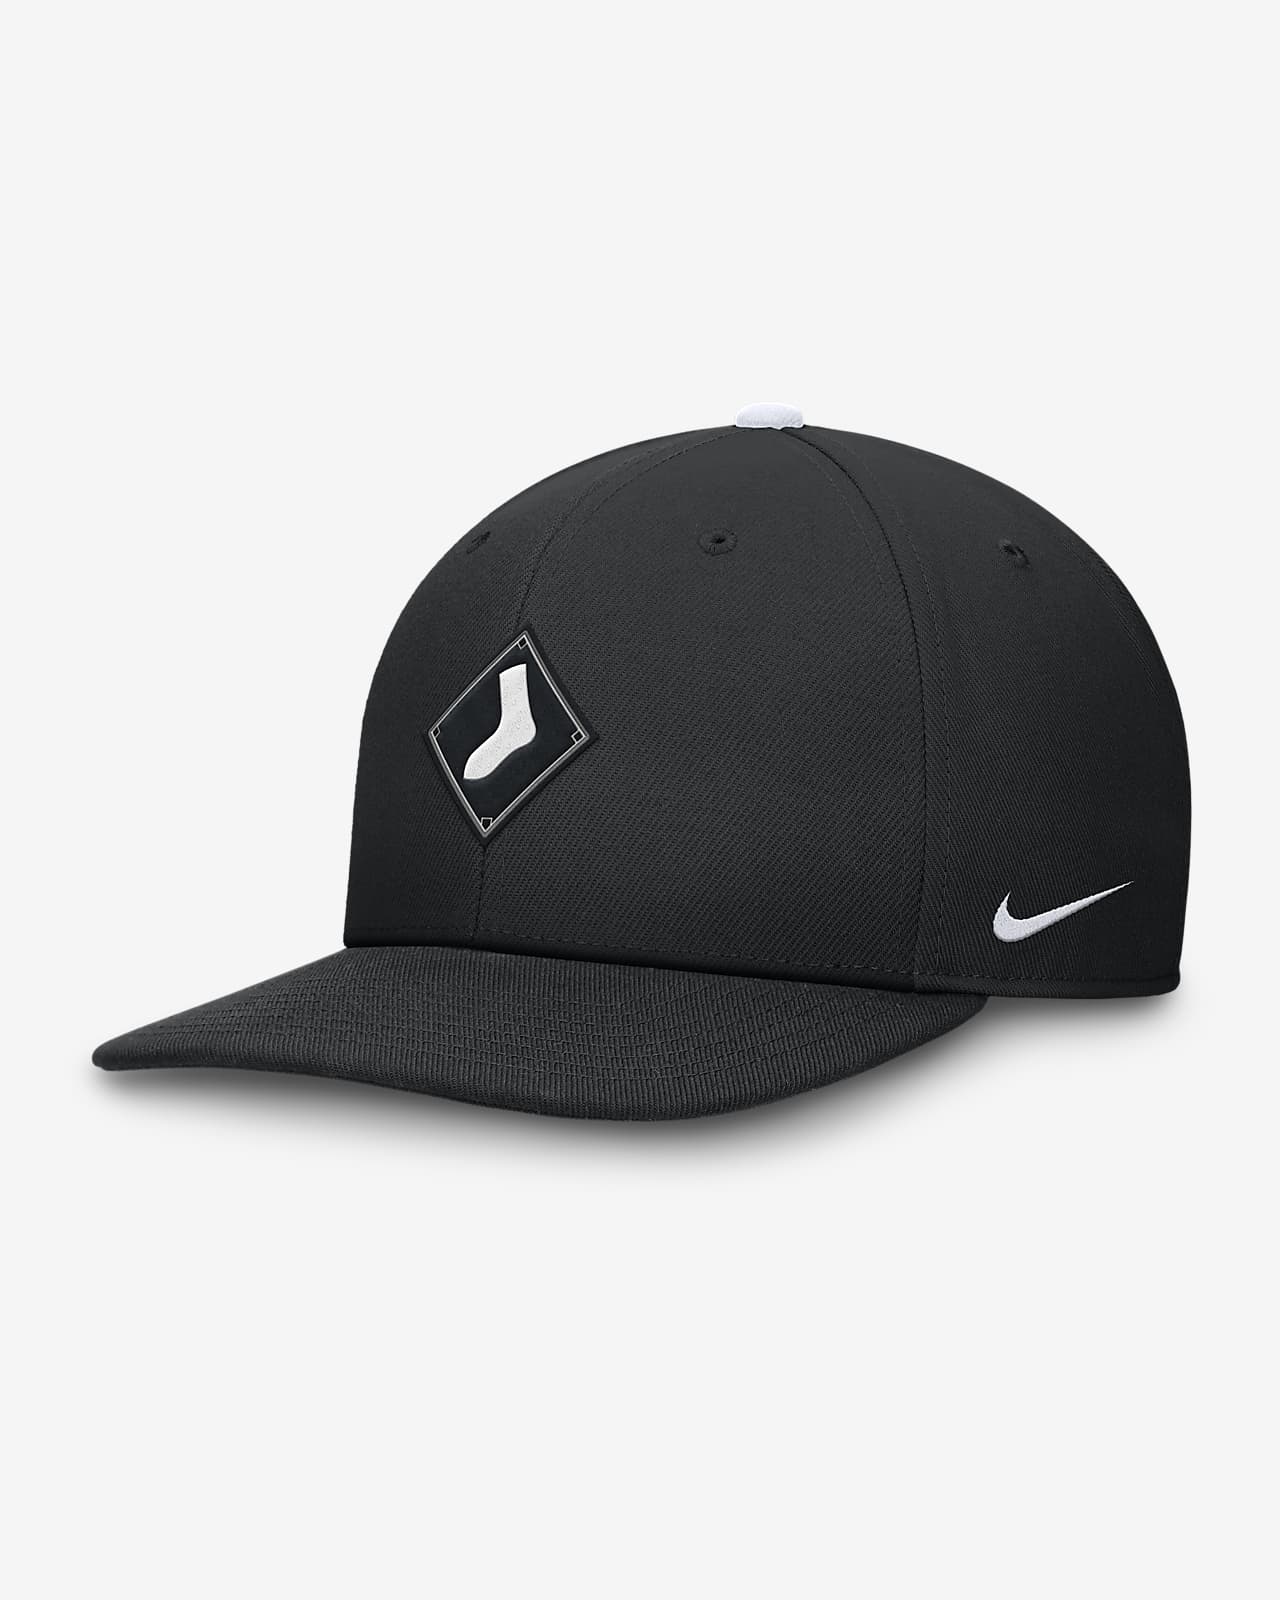 Chicago White Sox City Connect Pro Nike Dri-FIT MLB Adjustable Hat